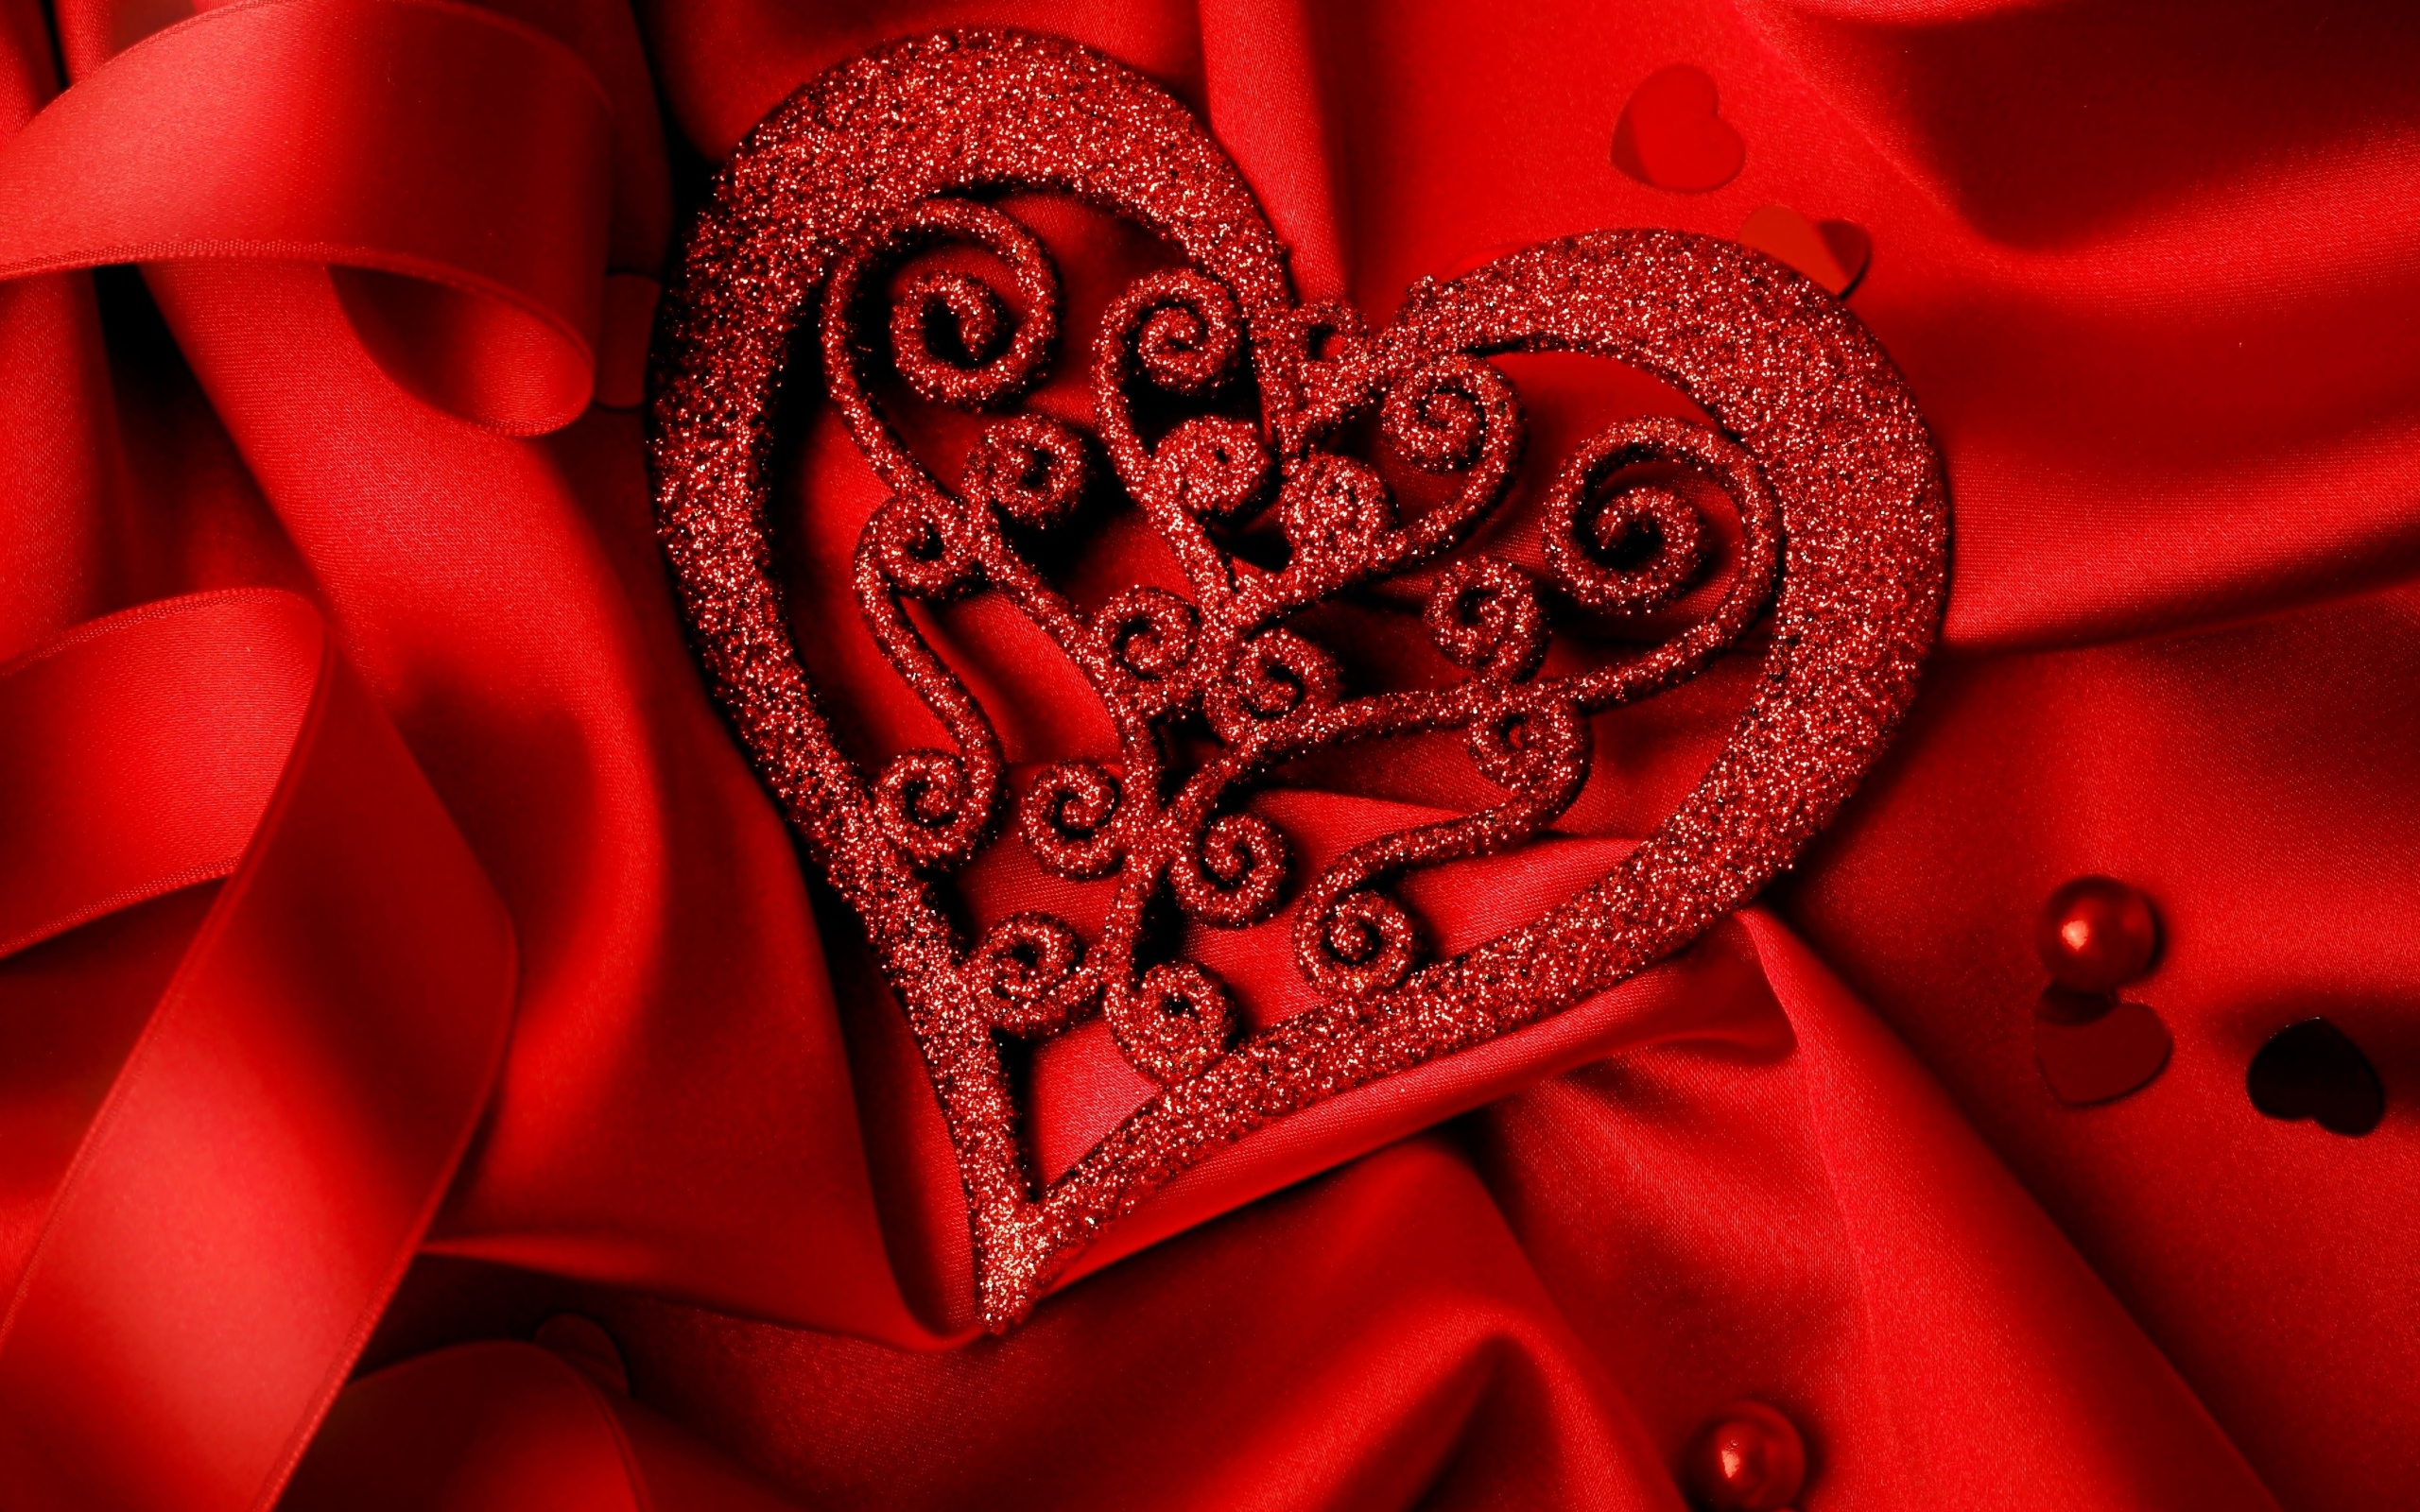 Brilliant heart on a red satin fabric